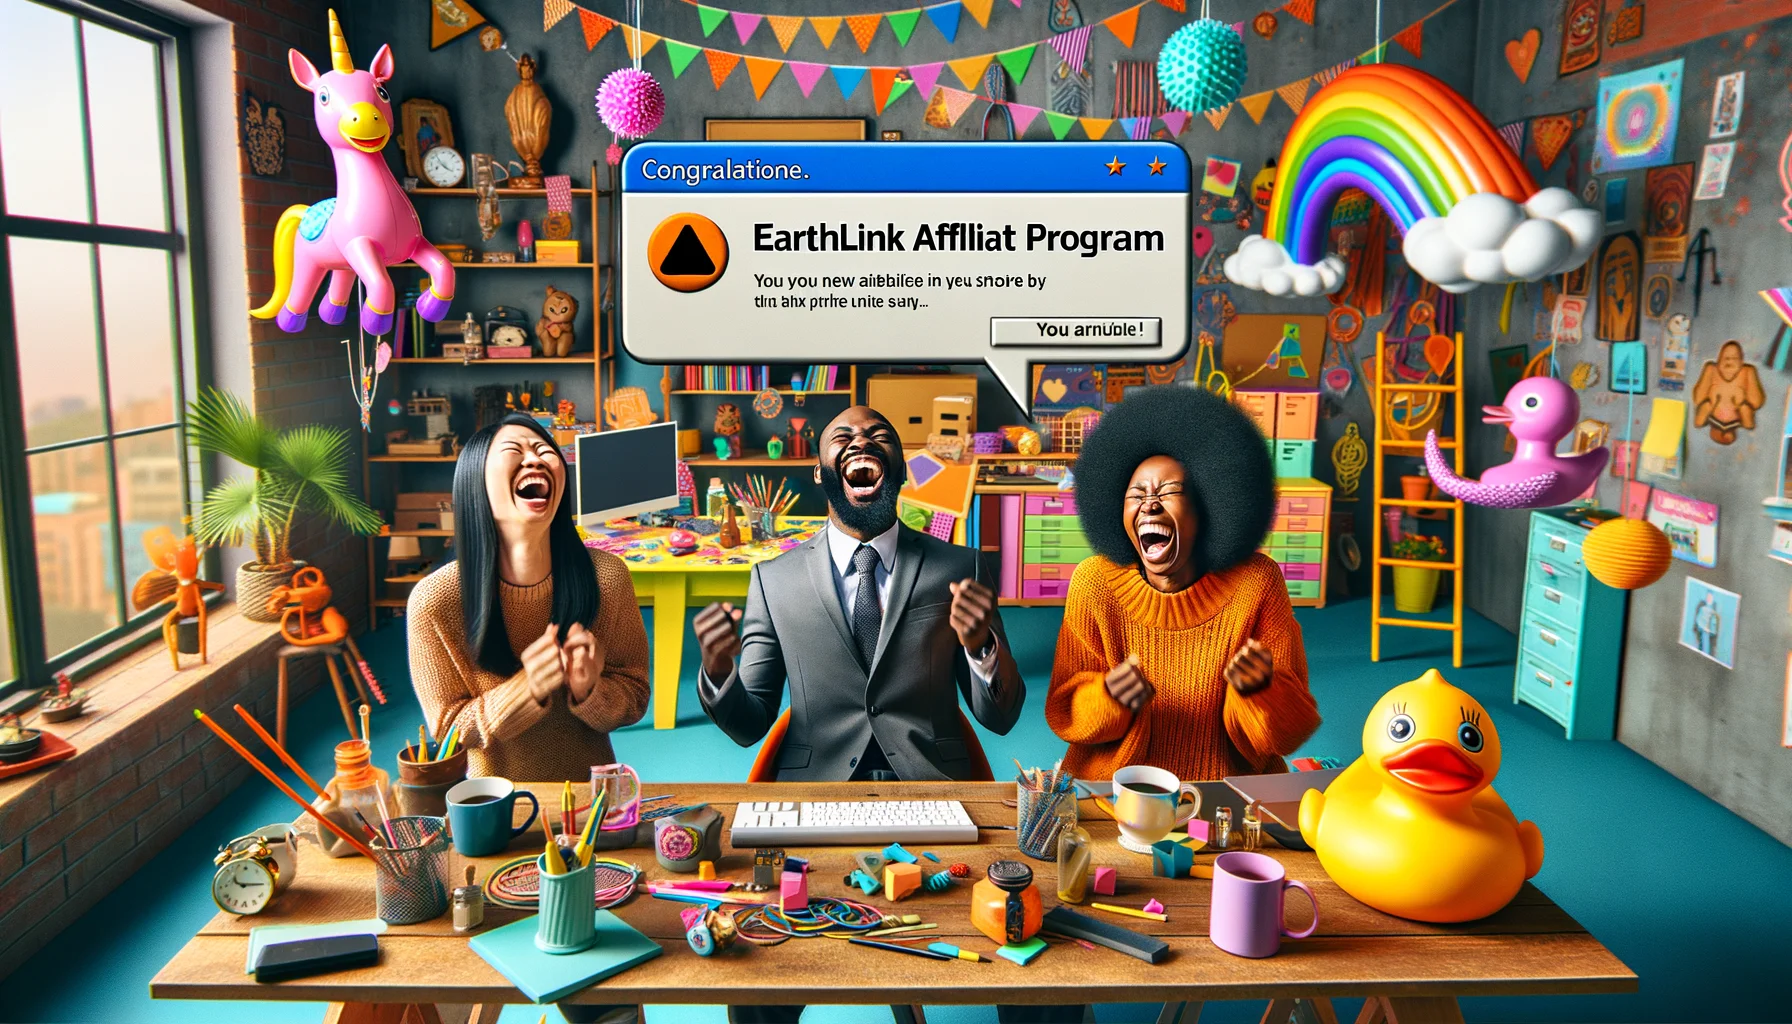 Create an interesting and amusing situation captured through an image, where characters are engaging with the Earthlink Affiliate Program. In the picture, there's an Asian woman and a Black man sitting in a vibrant, funky office filled with random but amusing objects like a giant rubber duck, a rainbow unicorn statue, and a coffee mug shaped like a laughing face. They are both looking at a computer screen, bursting into laughter. On their screen, an hilariously over-sized notification bubble is popping up, announcing their new status in the Earthlink Affiliate Program with a cheesy, congratulatory phrase.